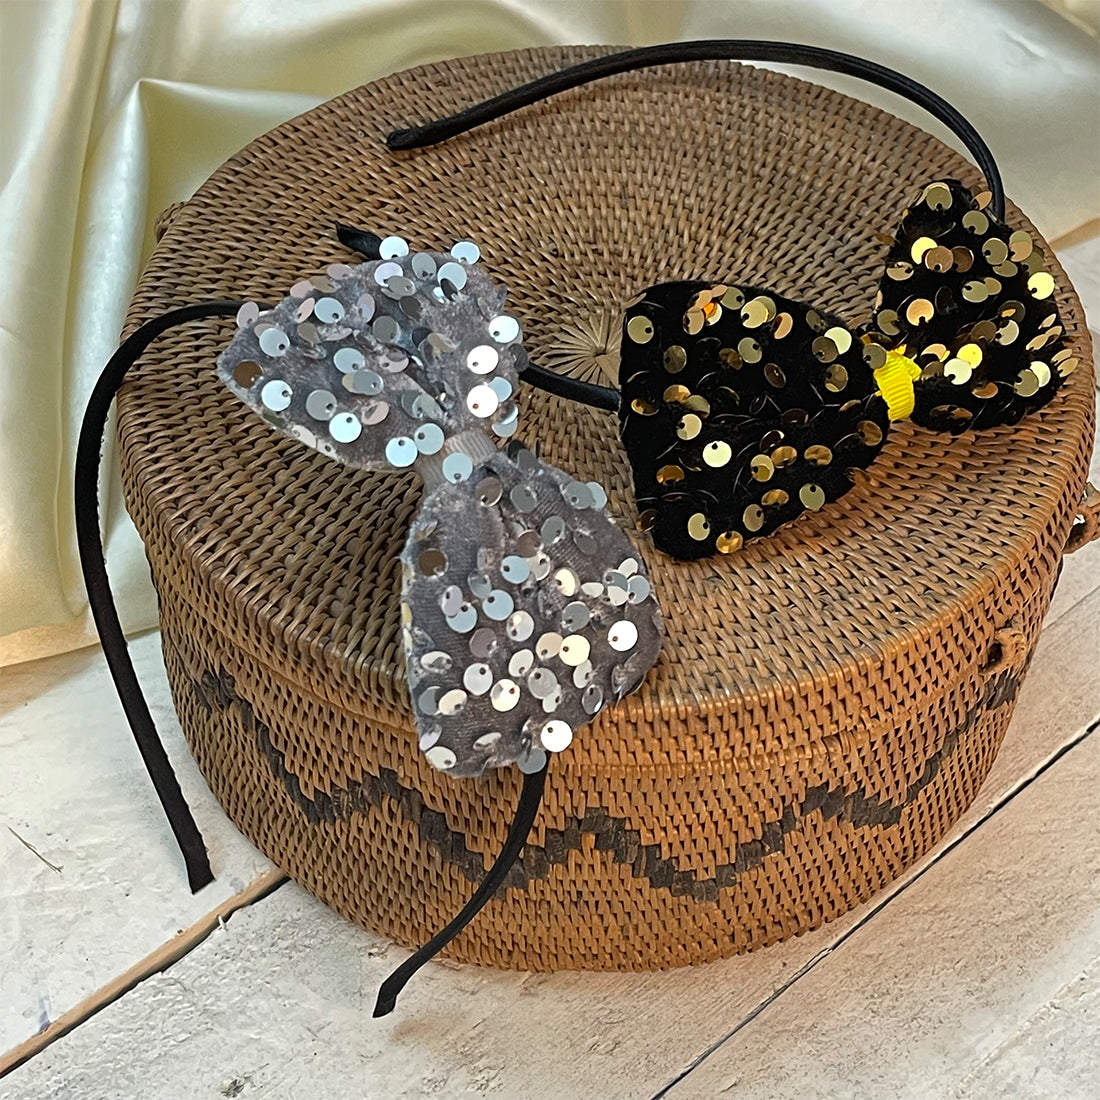 SET OF TWO GOLD & SILVER SEQUIN BOW HAIRBANDS